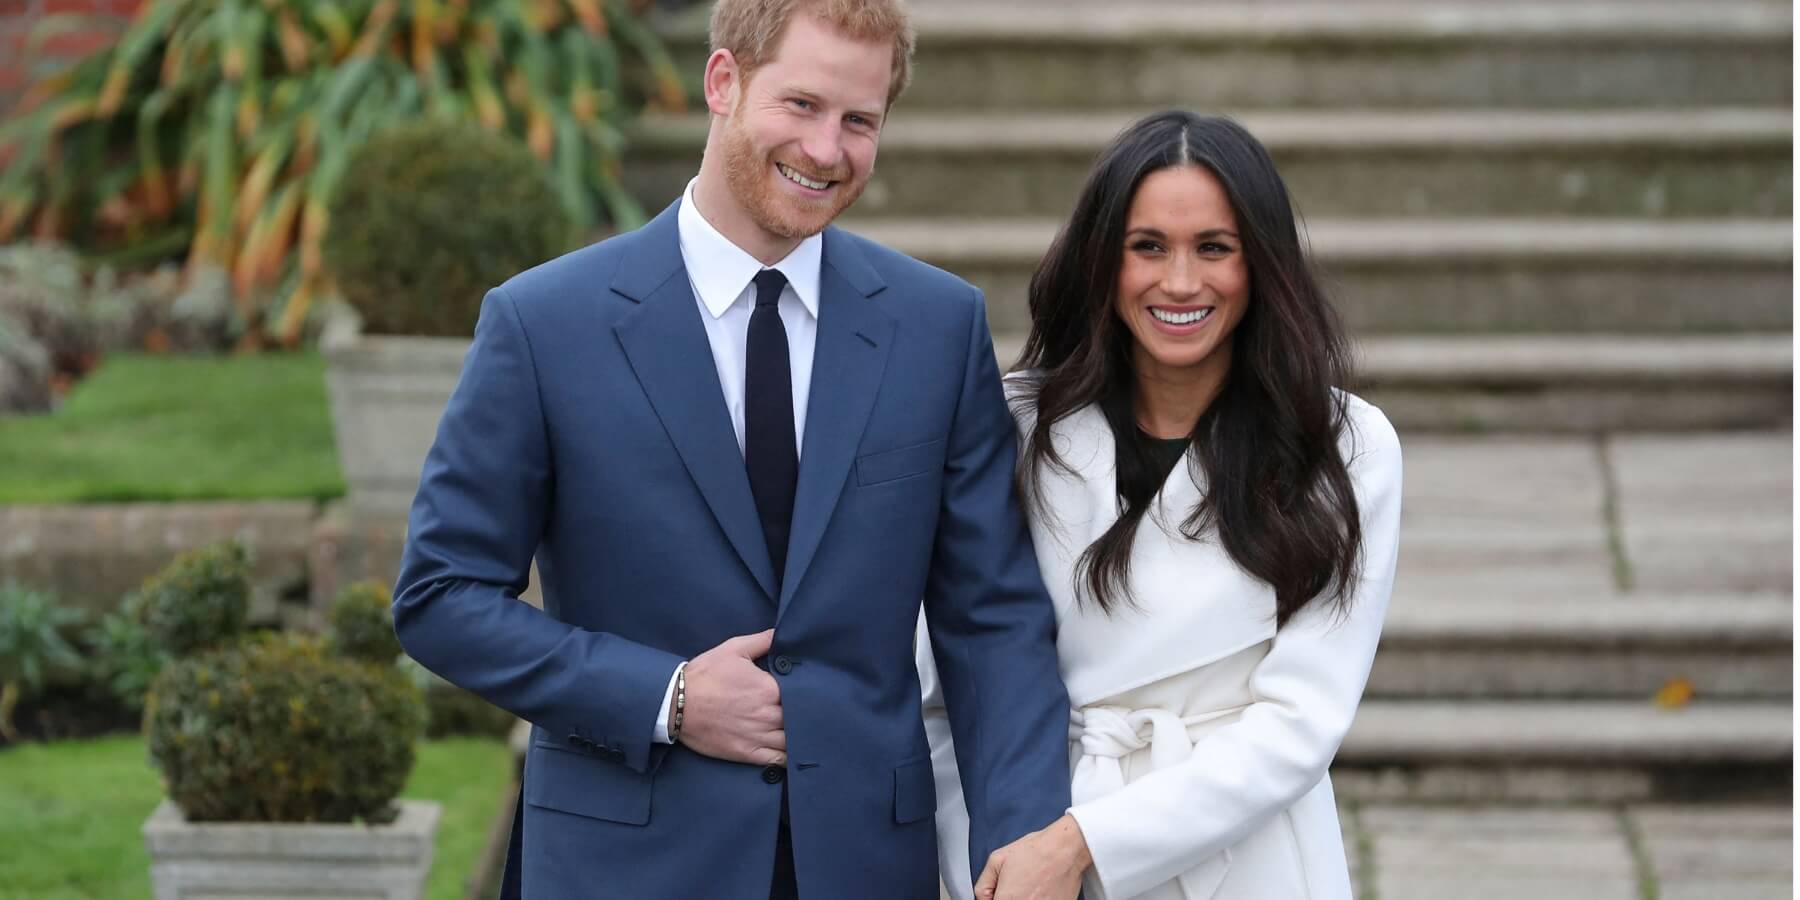 Prince Harry and Meghan Markle announce their engagement in November 2017.